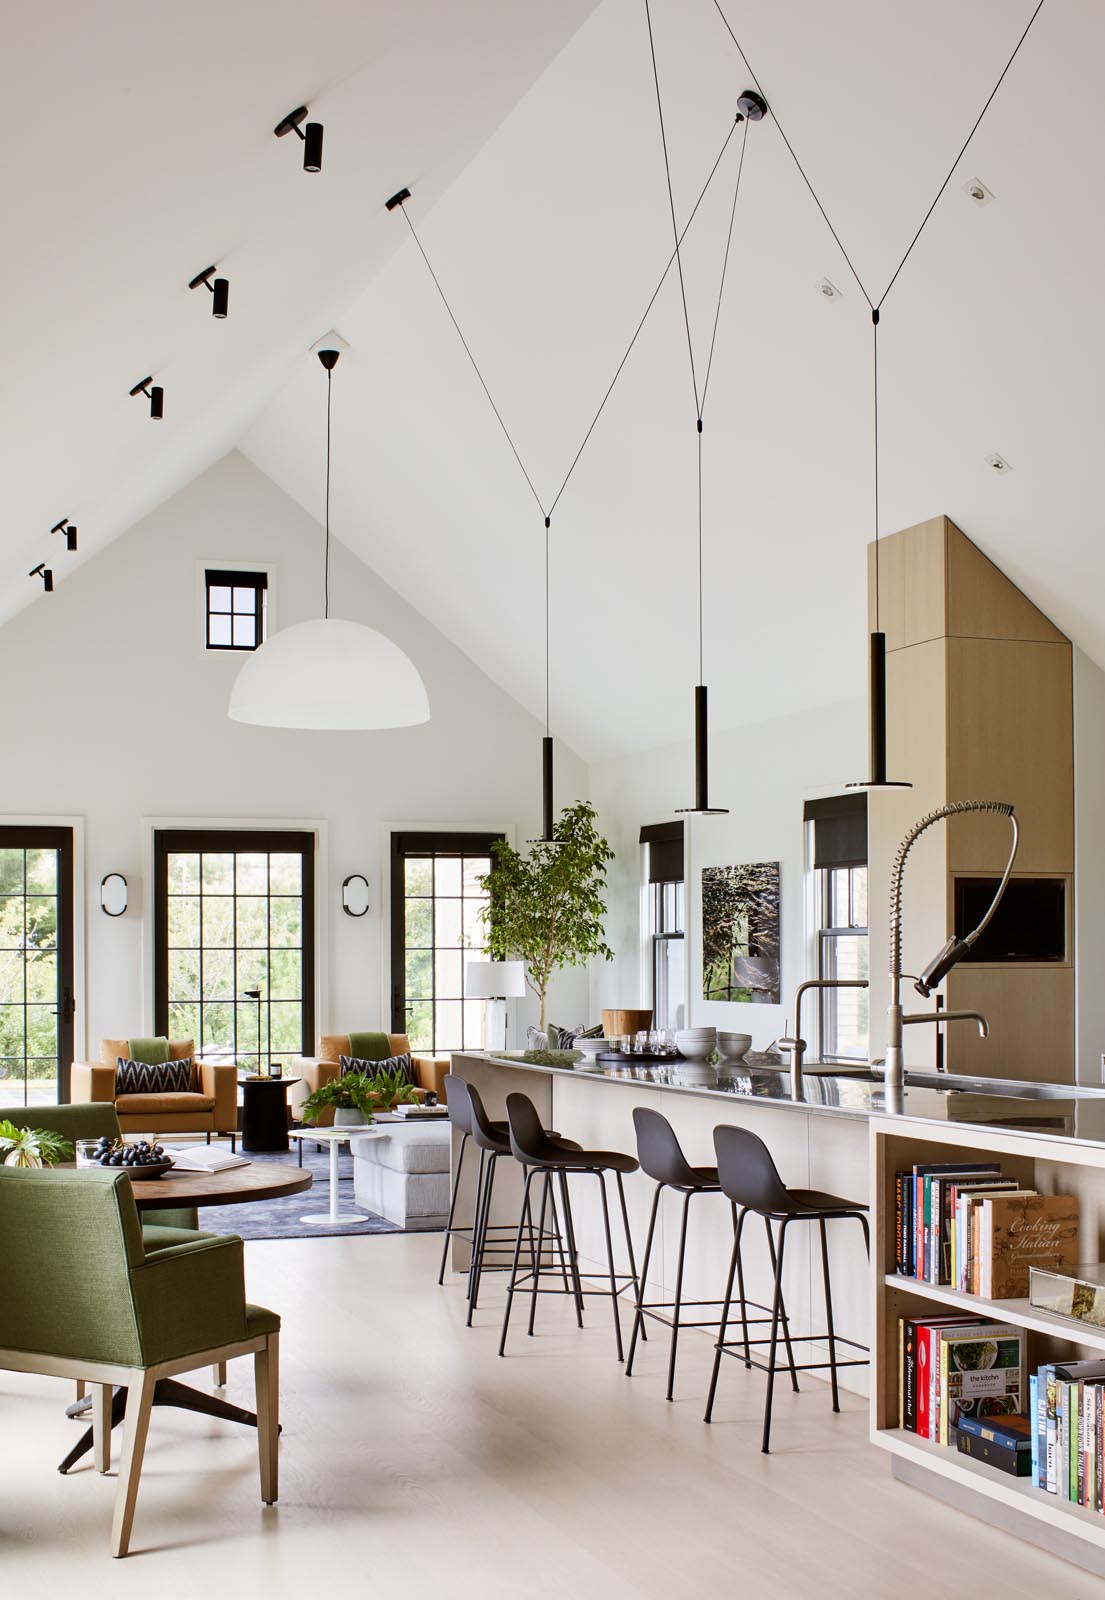 In the kitchen, there's minimalist light wood cabinets and a long island with black pendant lights and room for multiple stools.